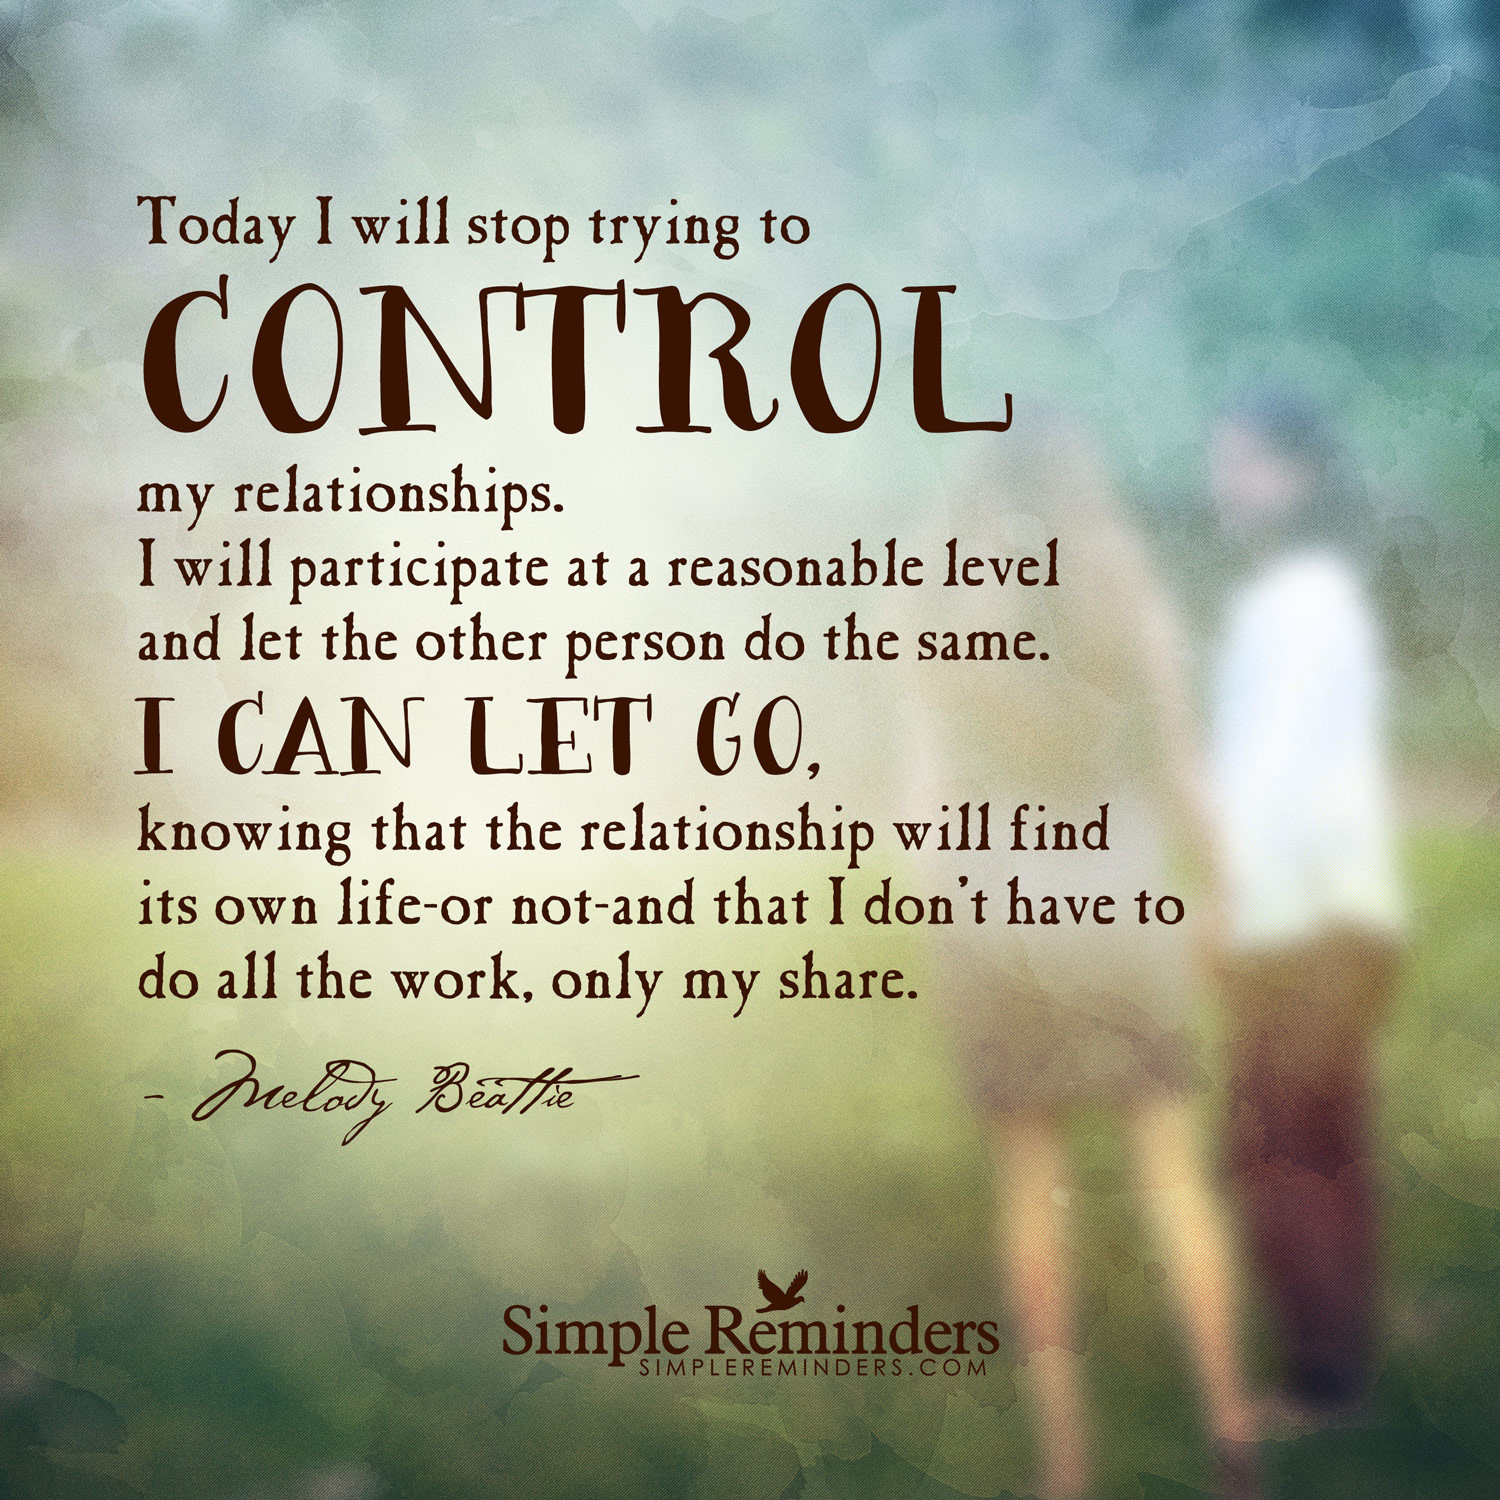 Manipulative Relationship Quotes
 Quotes About Controlling Relationships QuotesGram